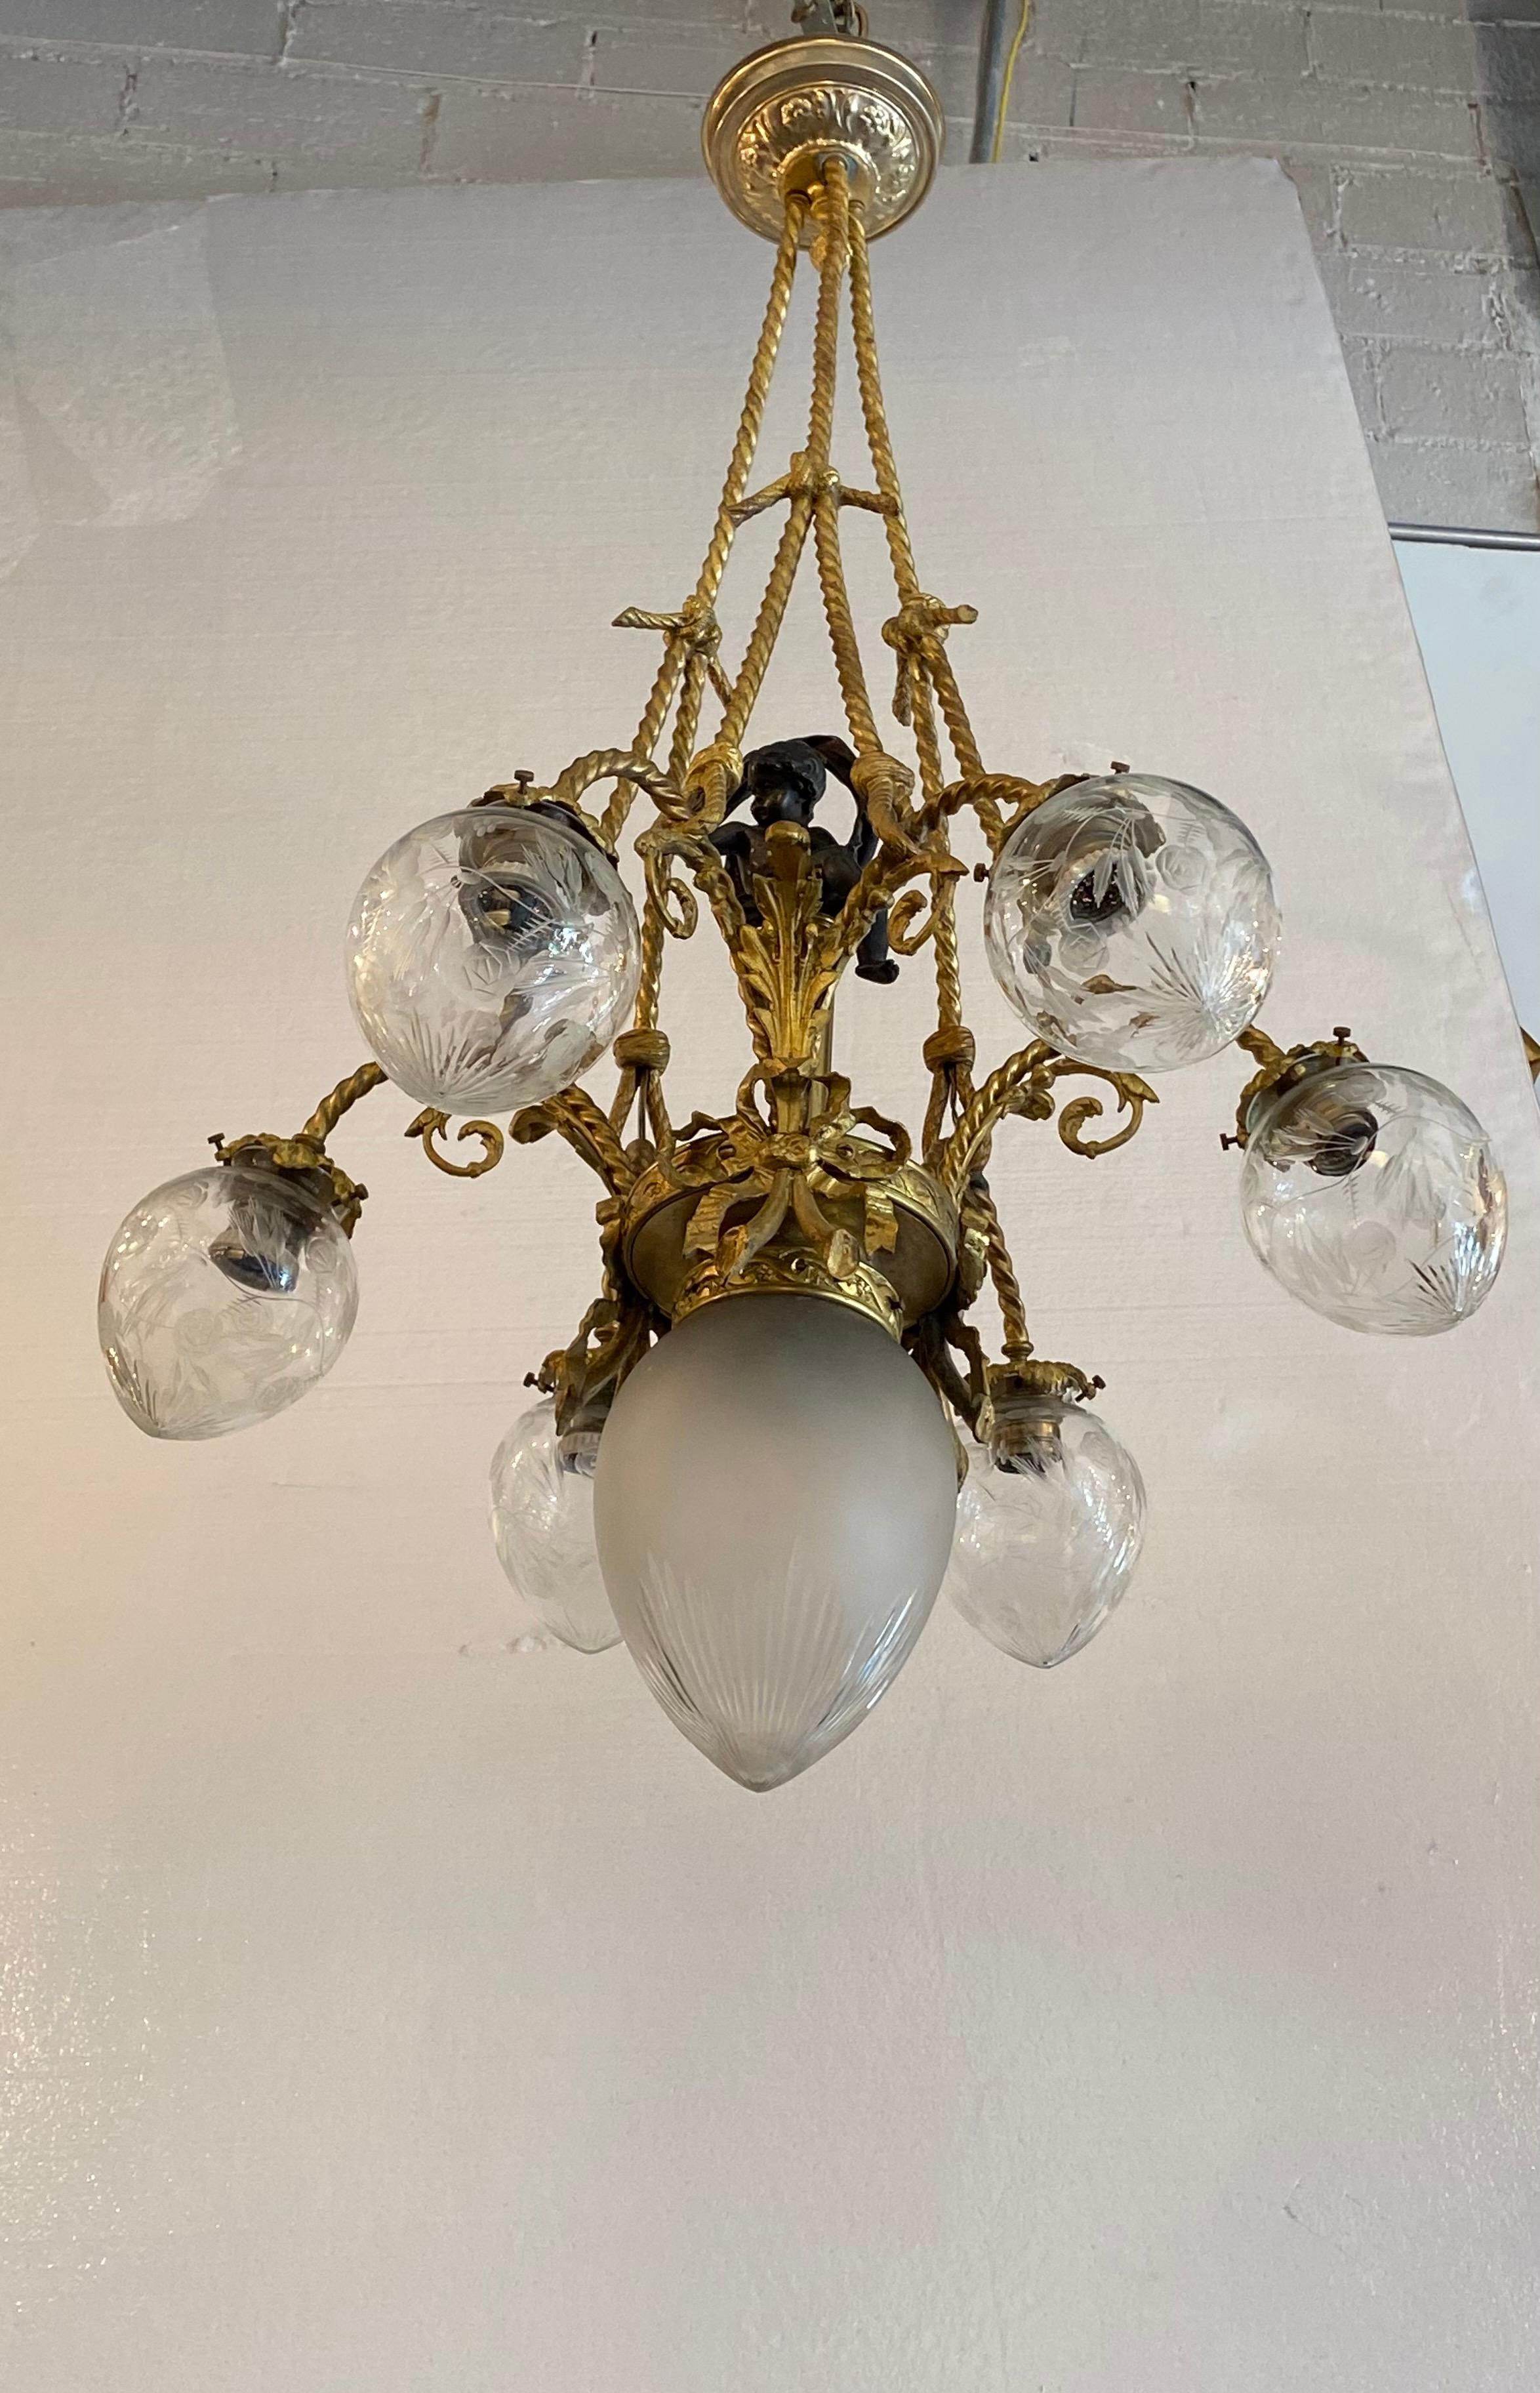 Antique bronze French 19th century chandelier 7 lights, in excellent conditions.